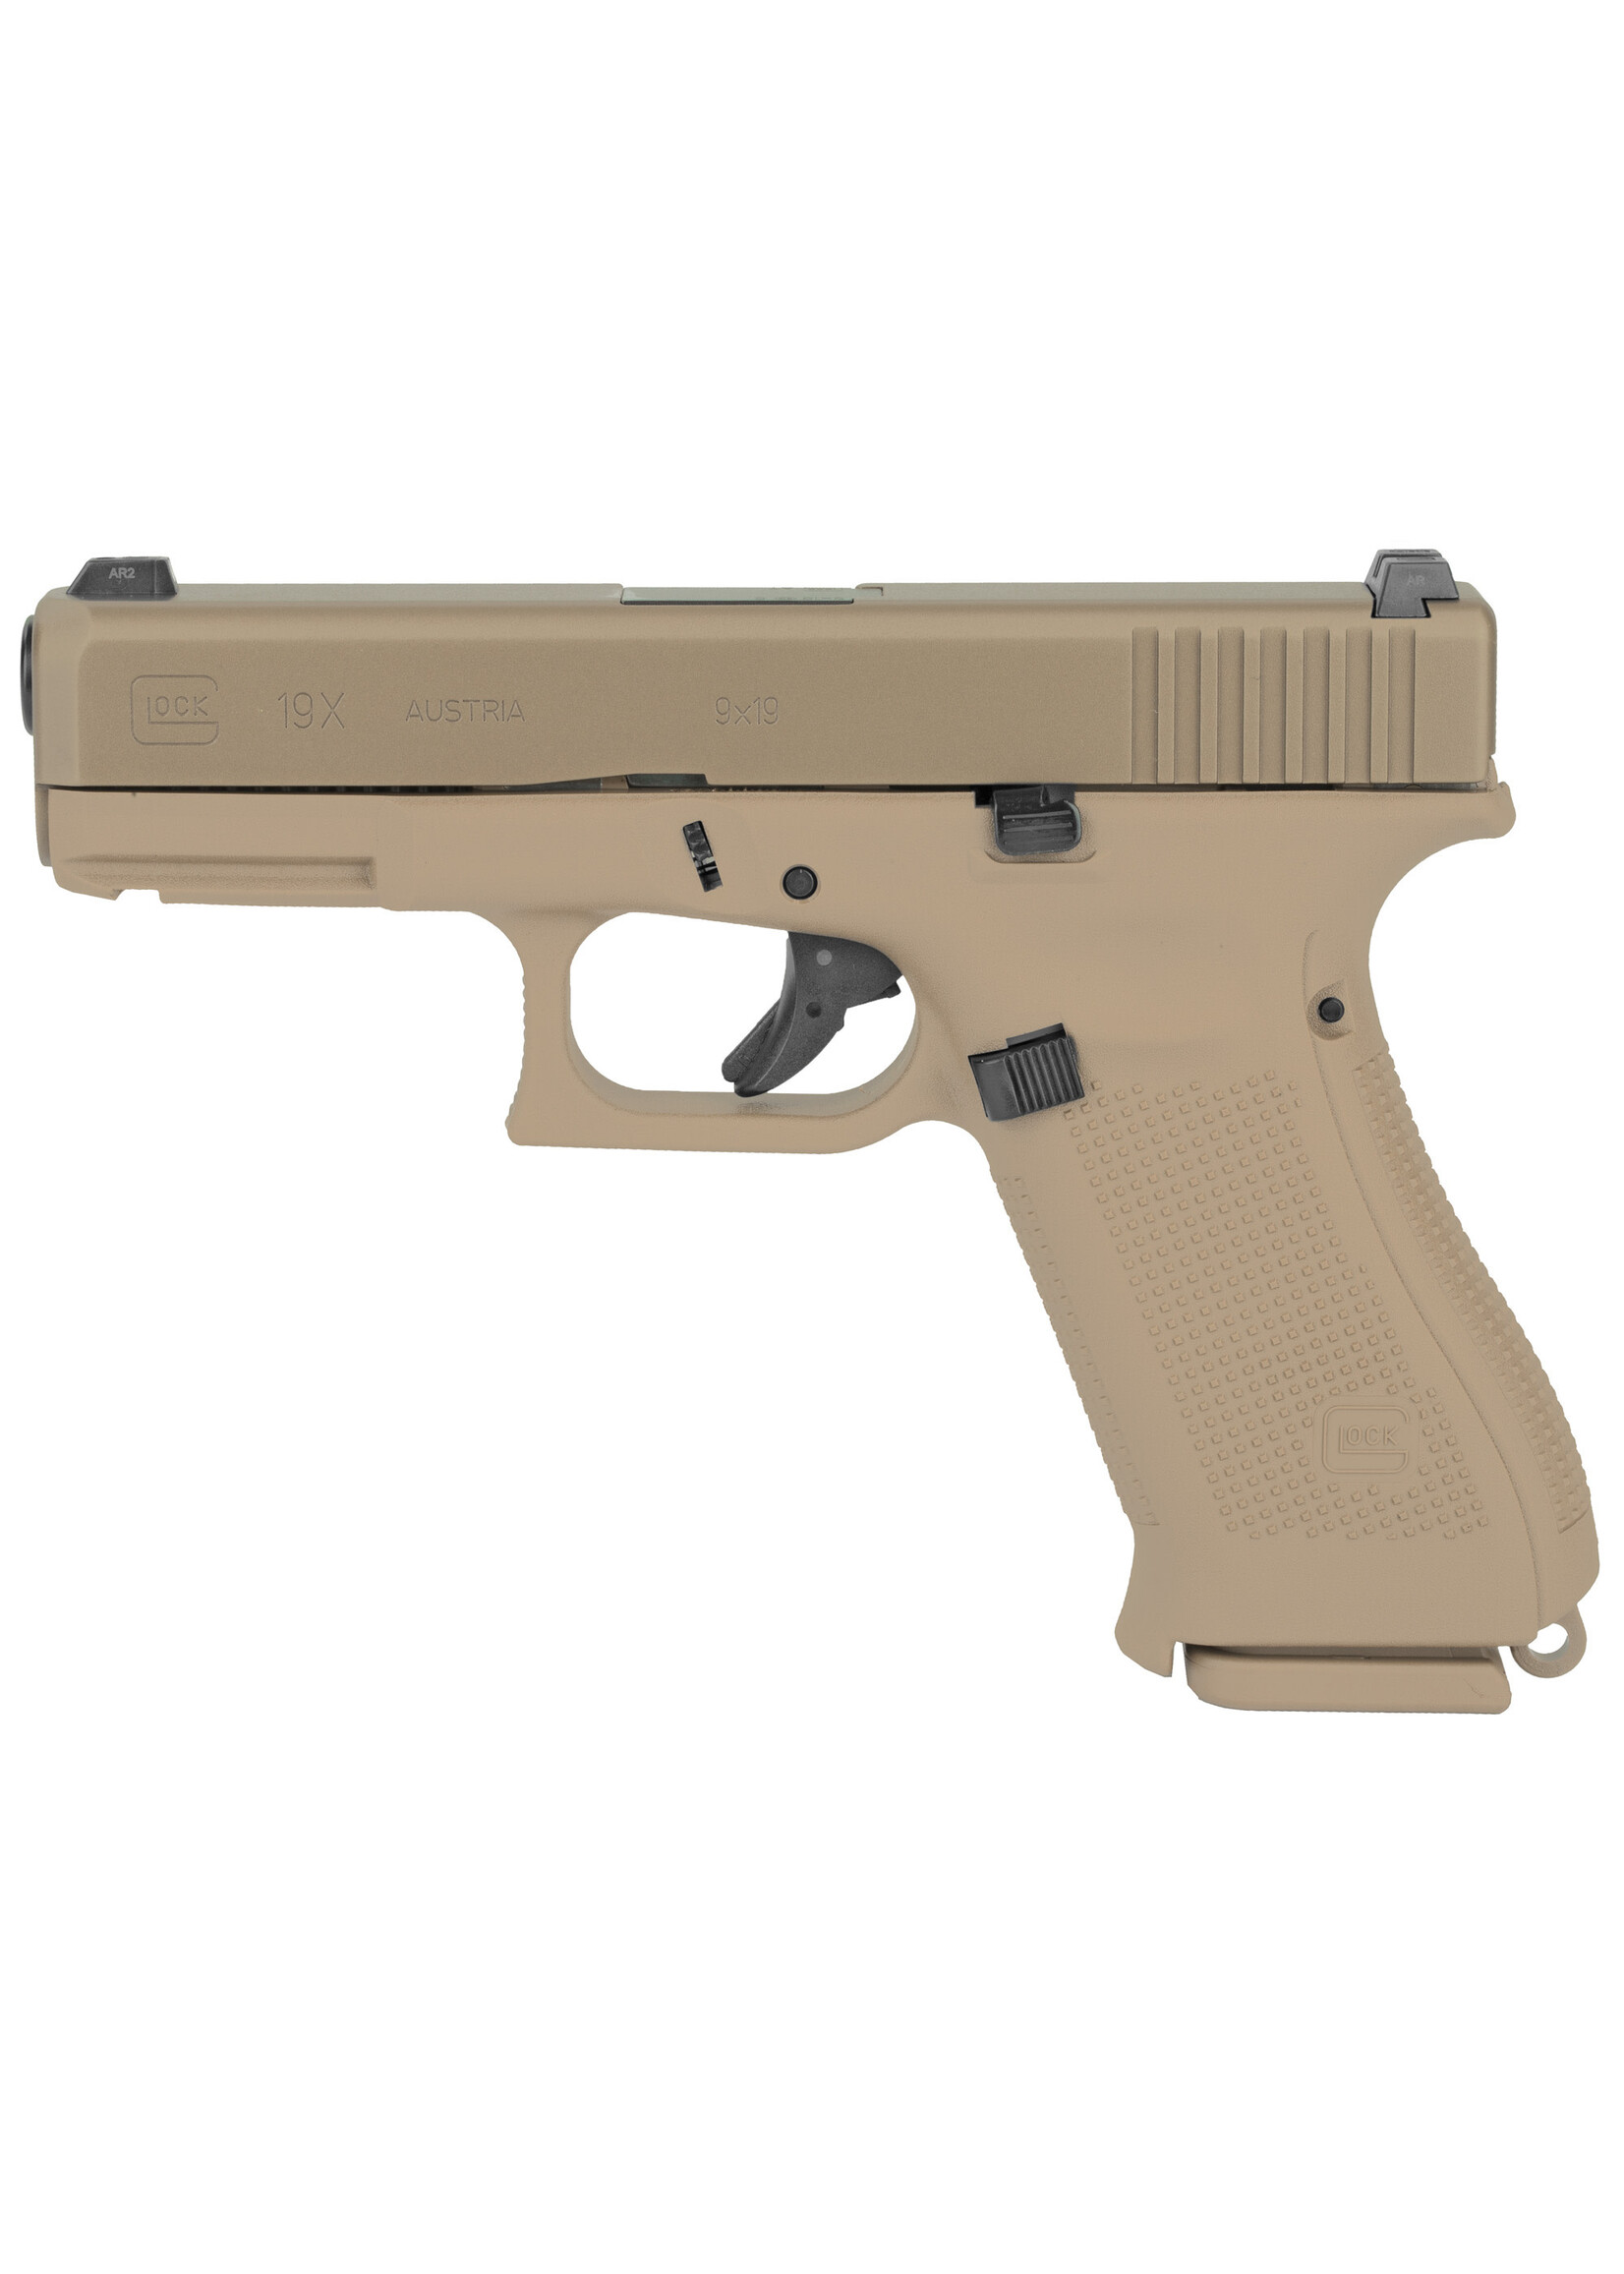 Glock Glock PX1950703 G19X Compact 9mm Luger 17+1/19+1 4.02" Black GMB Barrel, Coyote nPVD Serrated Slide, Coyote Brown Cerakote Polymer Frame w/Accessory Rail, Coyote Brown Textured Polymer Grip, Ambidextrous